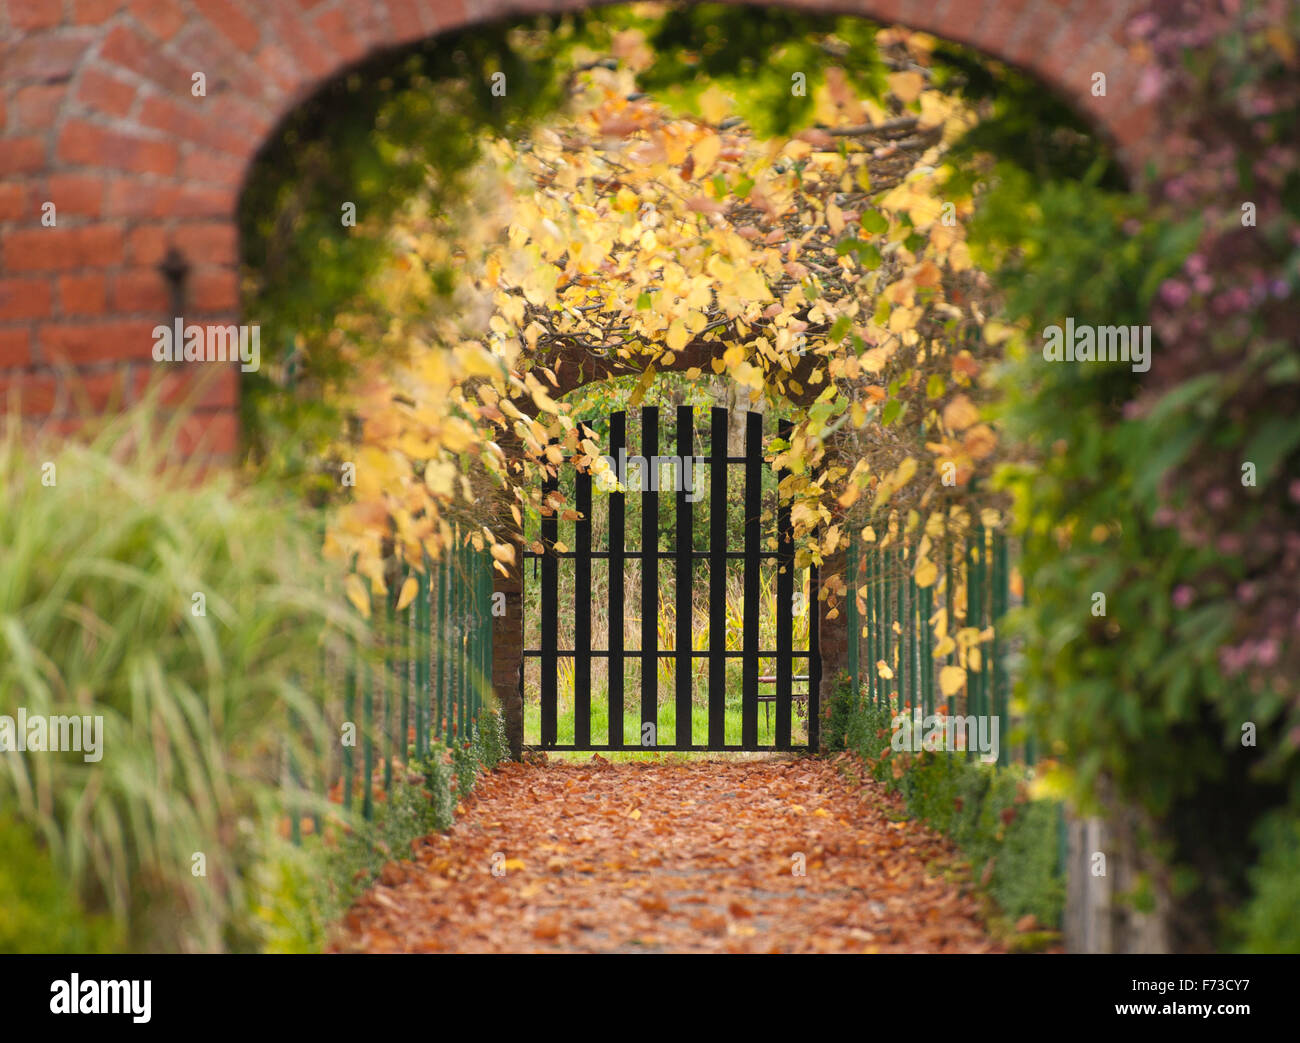 Dromoland Castle Hotel & Country Estate in Co. Clare is one of the finest 5 star castle hotels in Ireland. The walled garden Autumn scenes Stock Photo